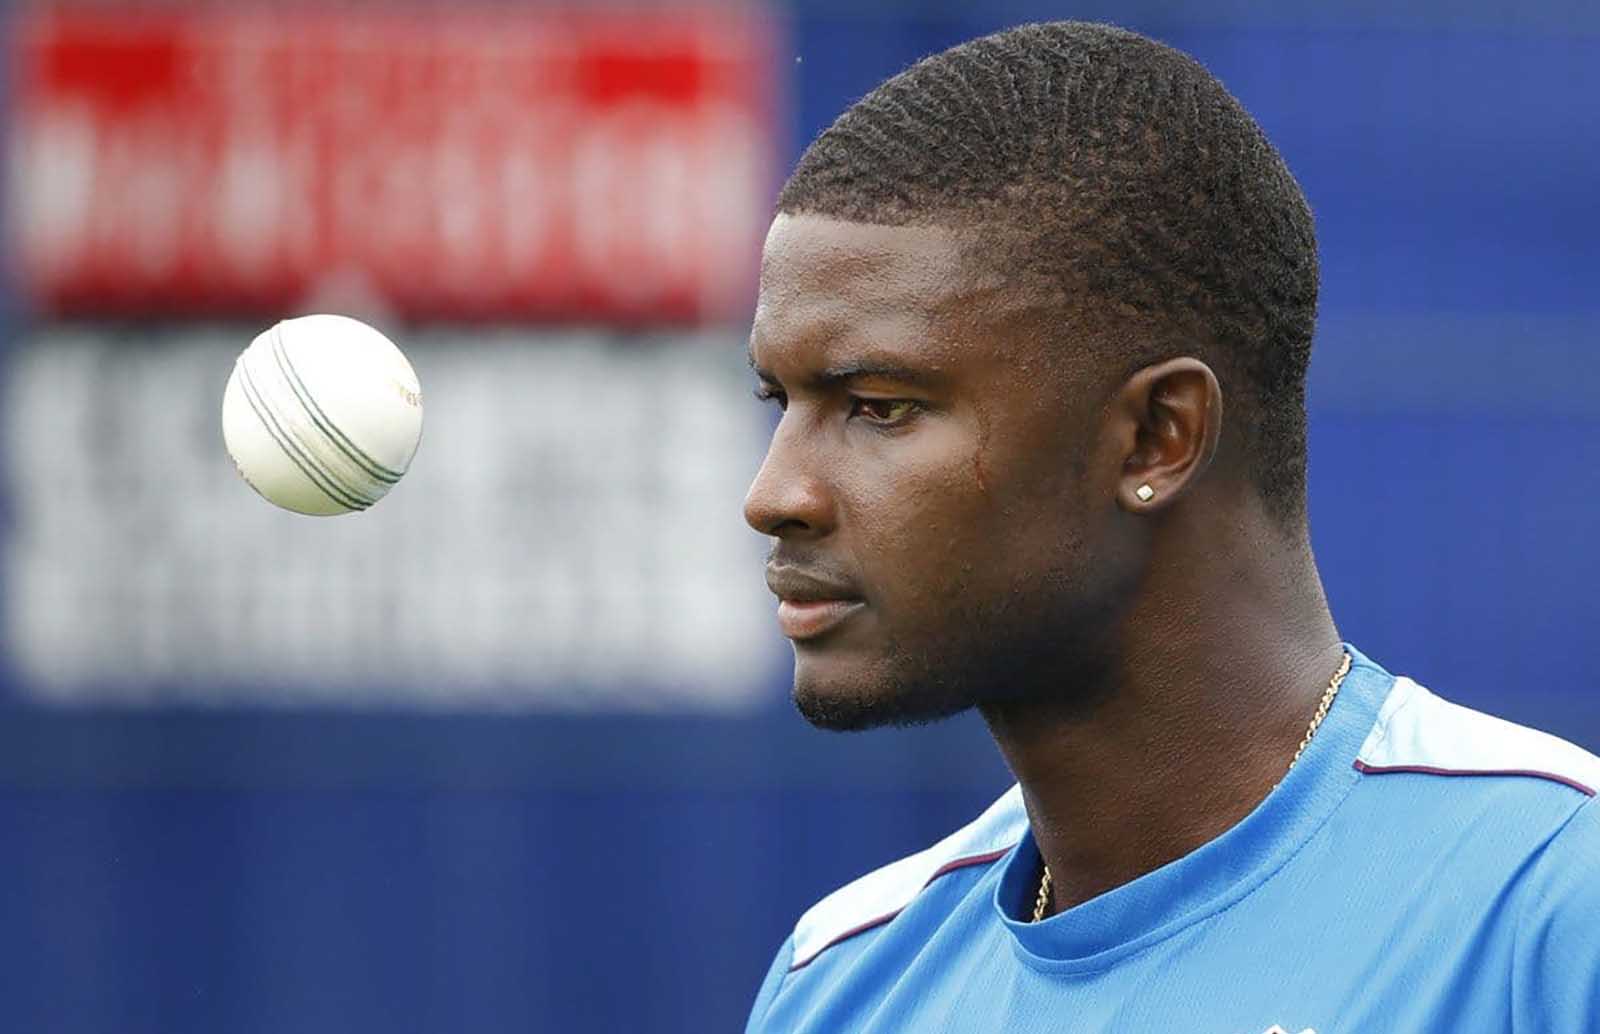 Jason Holder Replaces Mitchell Marsh in SRH for IPL 2020